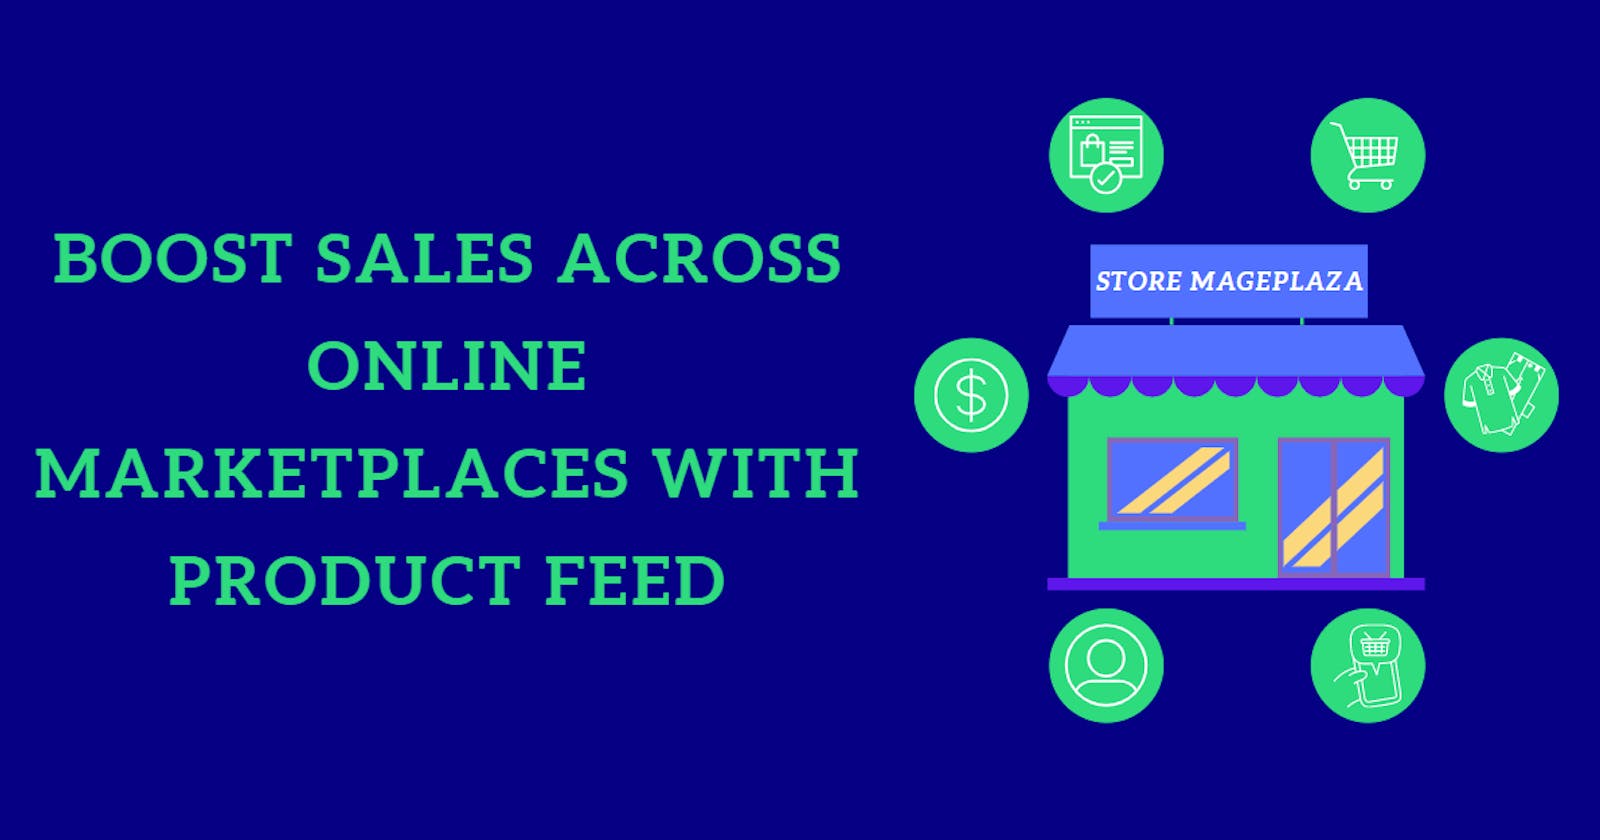 Boost Sales across Online Marketplaces with Product Feed